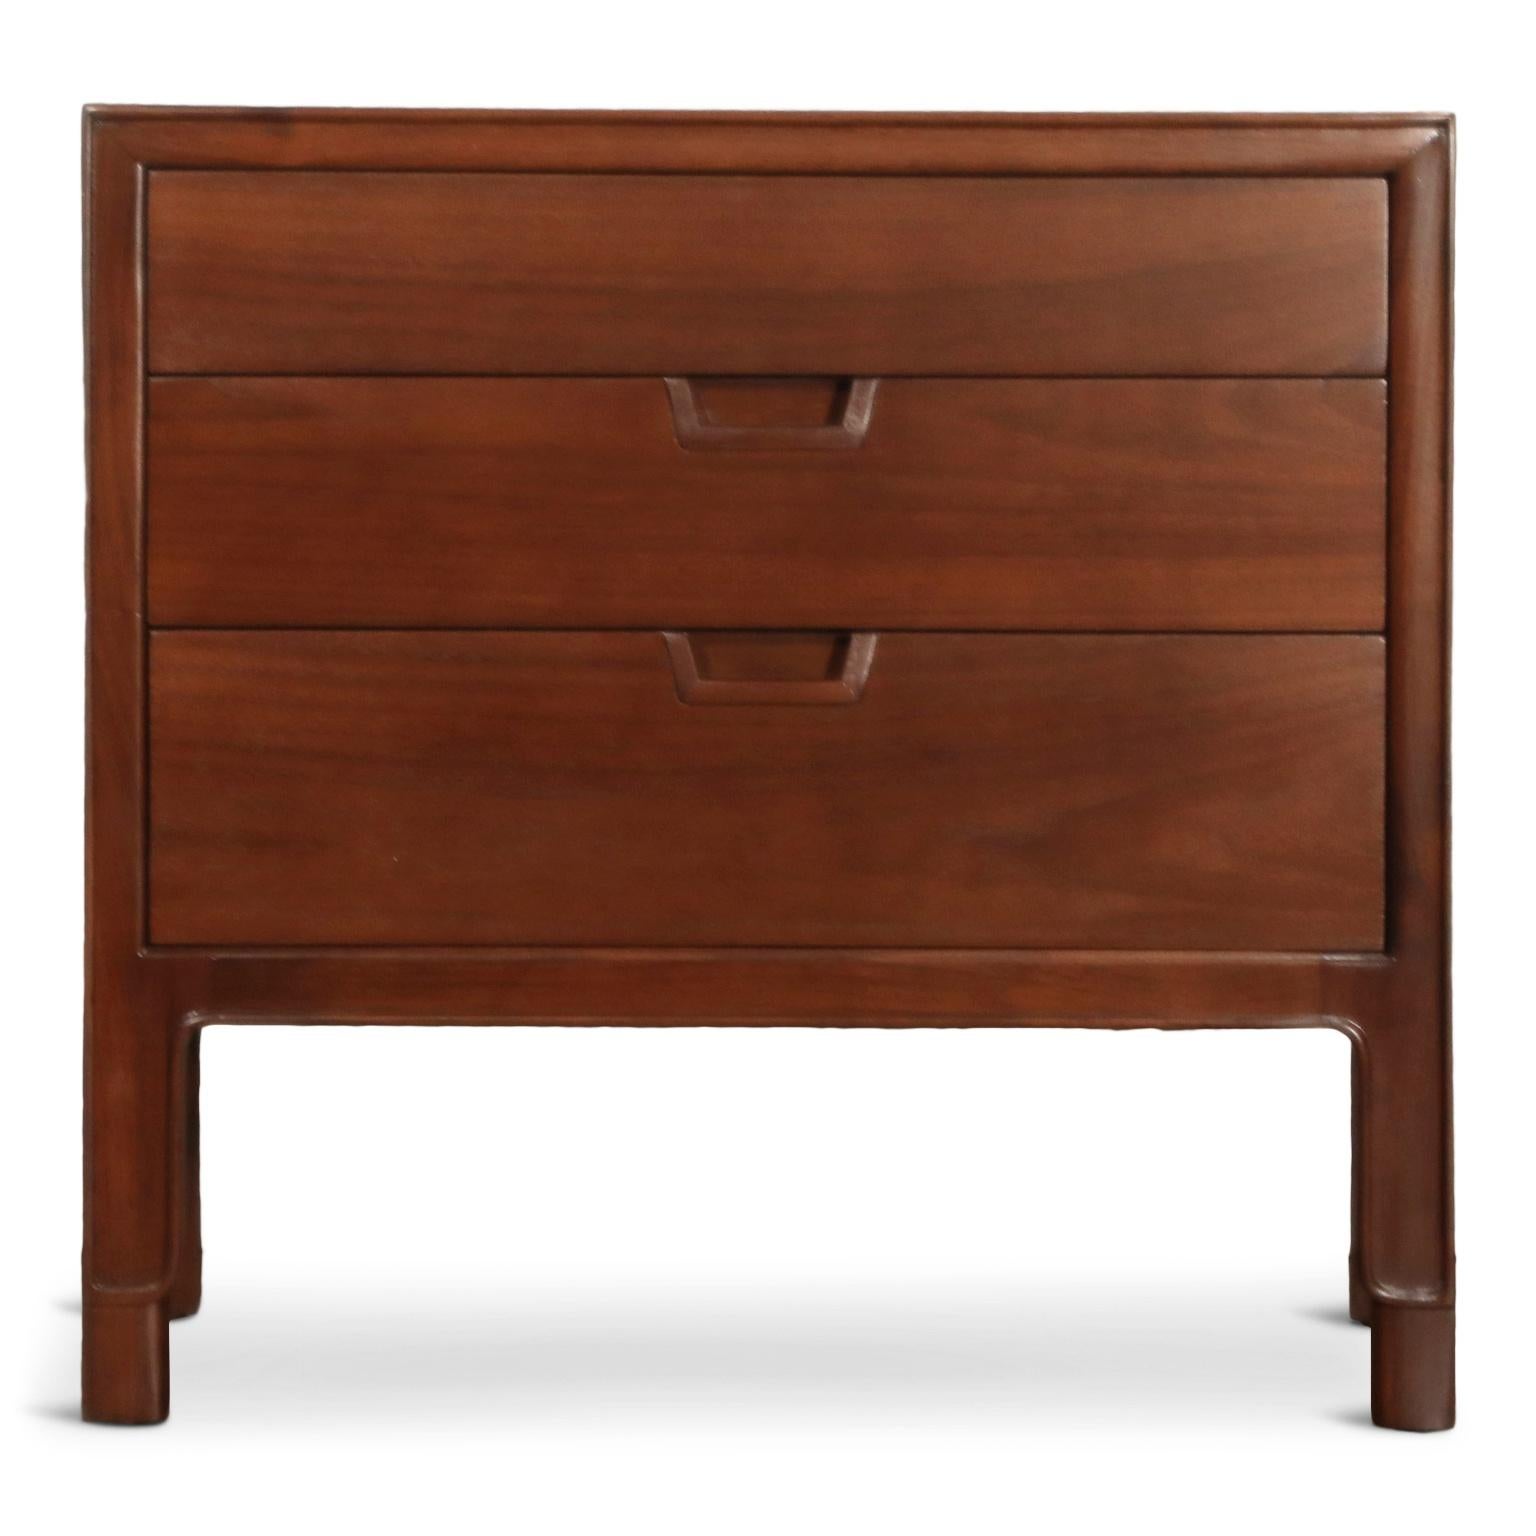 A beautifully restored pair of nightstands, or can also be used as end tables/sides tables, by John Stuart for Janus Collection by Mount Airy Furniture Company. Each nightstands features gorgeous wood grain and three sliding drawers with ample